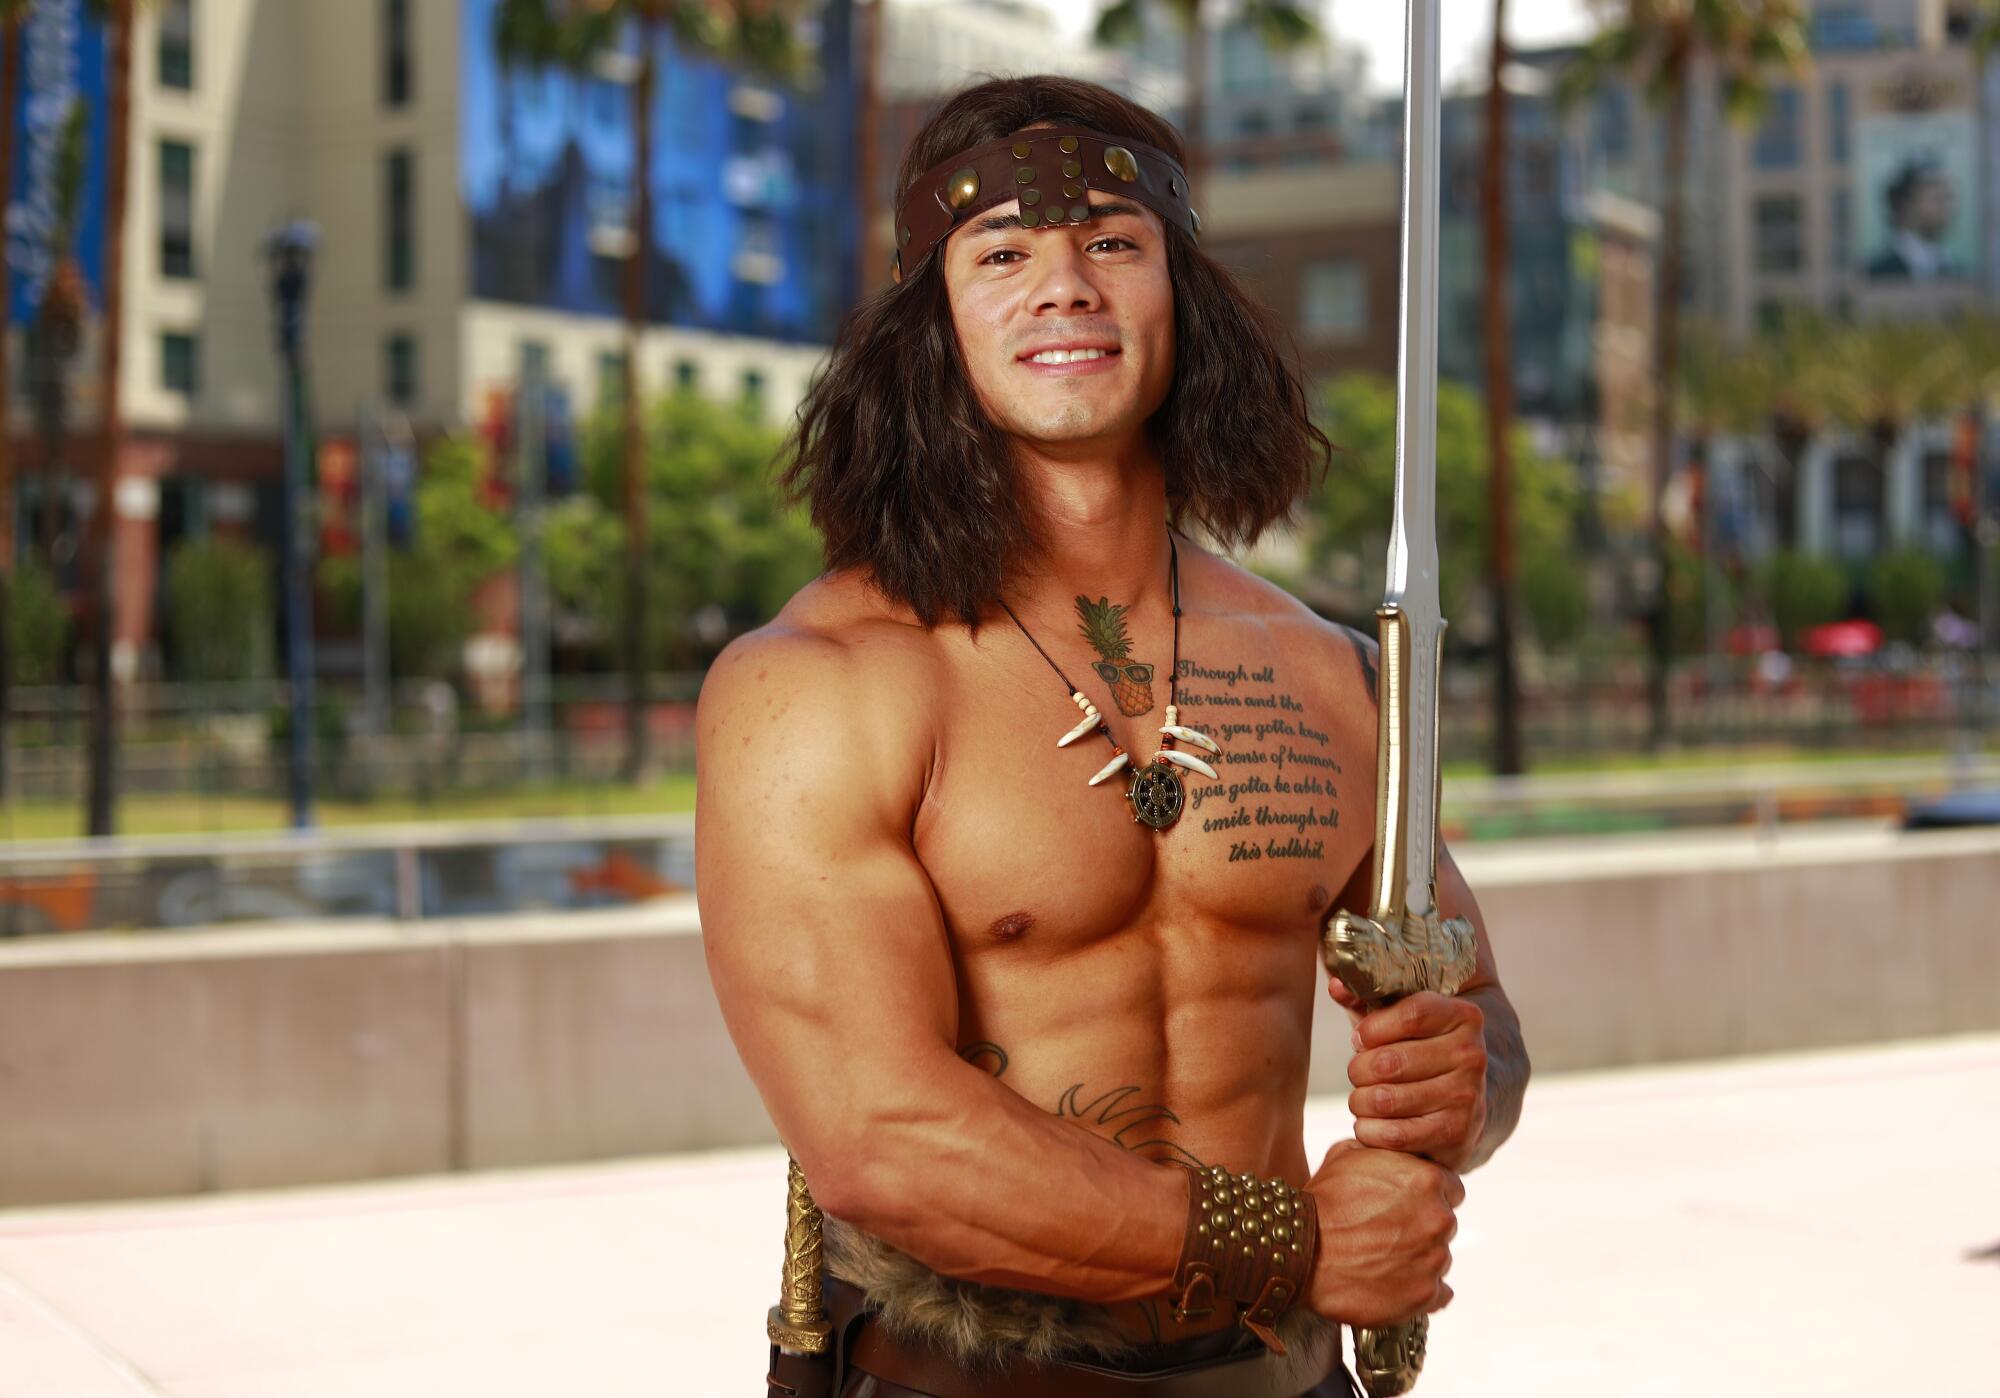 Manuel Carrillo for Corcoran dressed as Conan the Barbarian at Comic-Con.